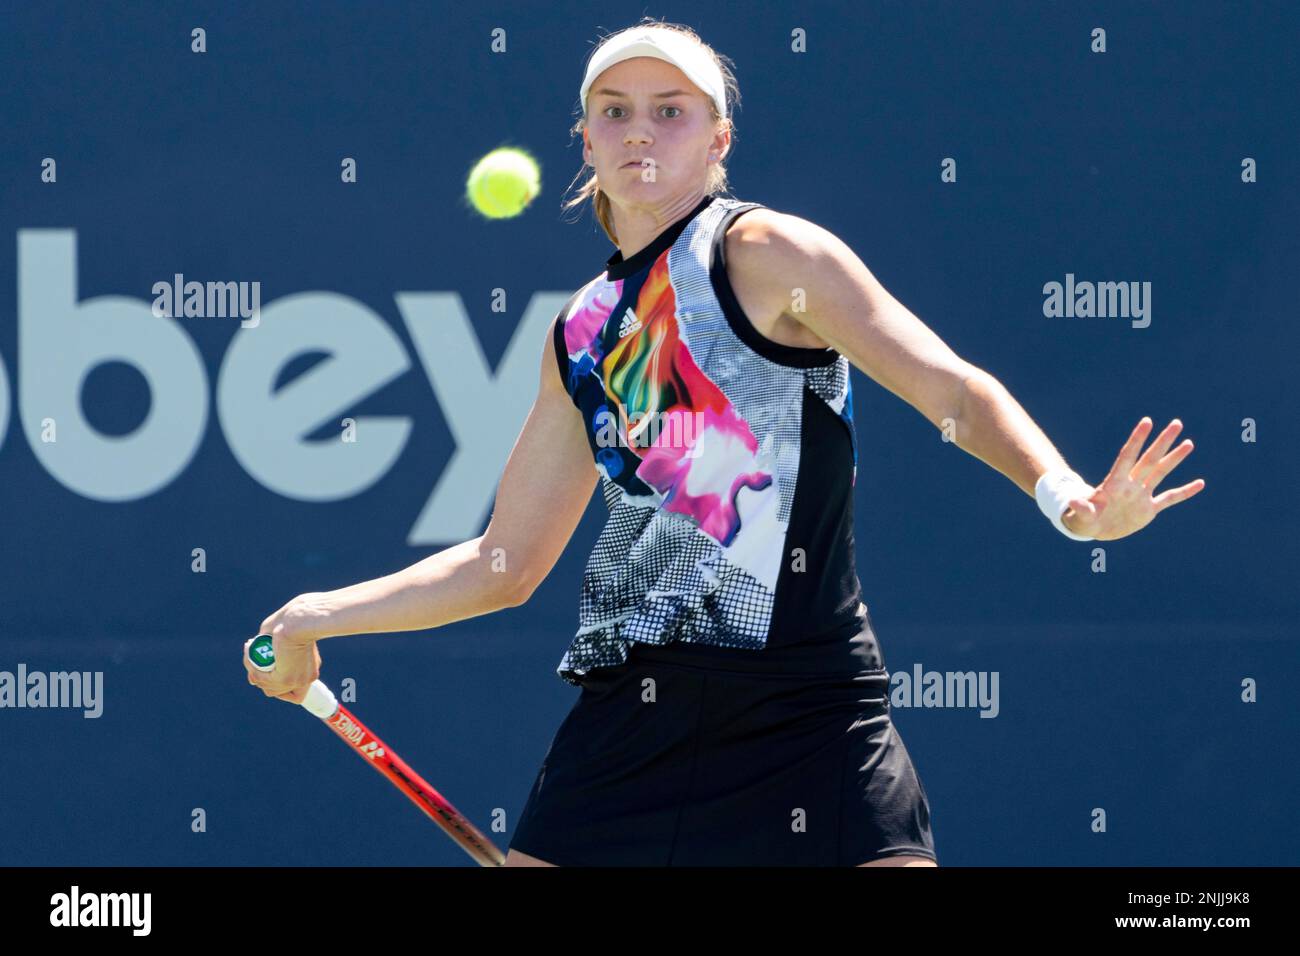 TORONTO, ON - AUGUST 10: Elena Rybakina returns the ball during her  National Bank Open tennis tournament second round match on August 10, 2022,  at Sobeys Stadium in Toronto, ON, Canada. (Photo